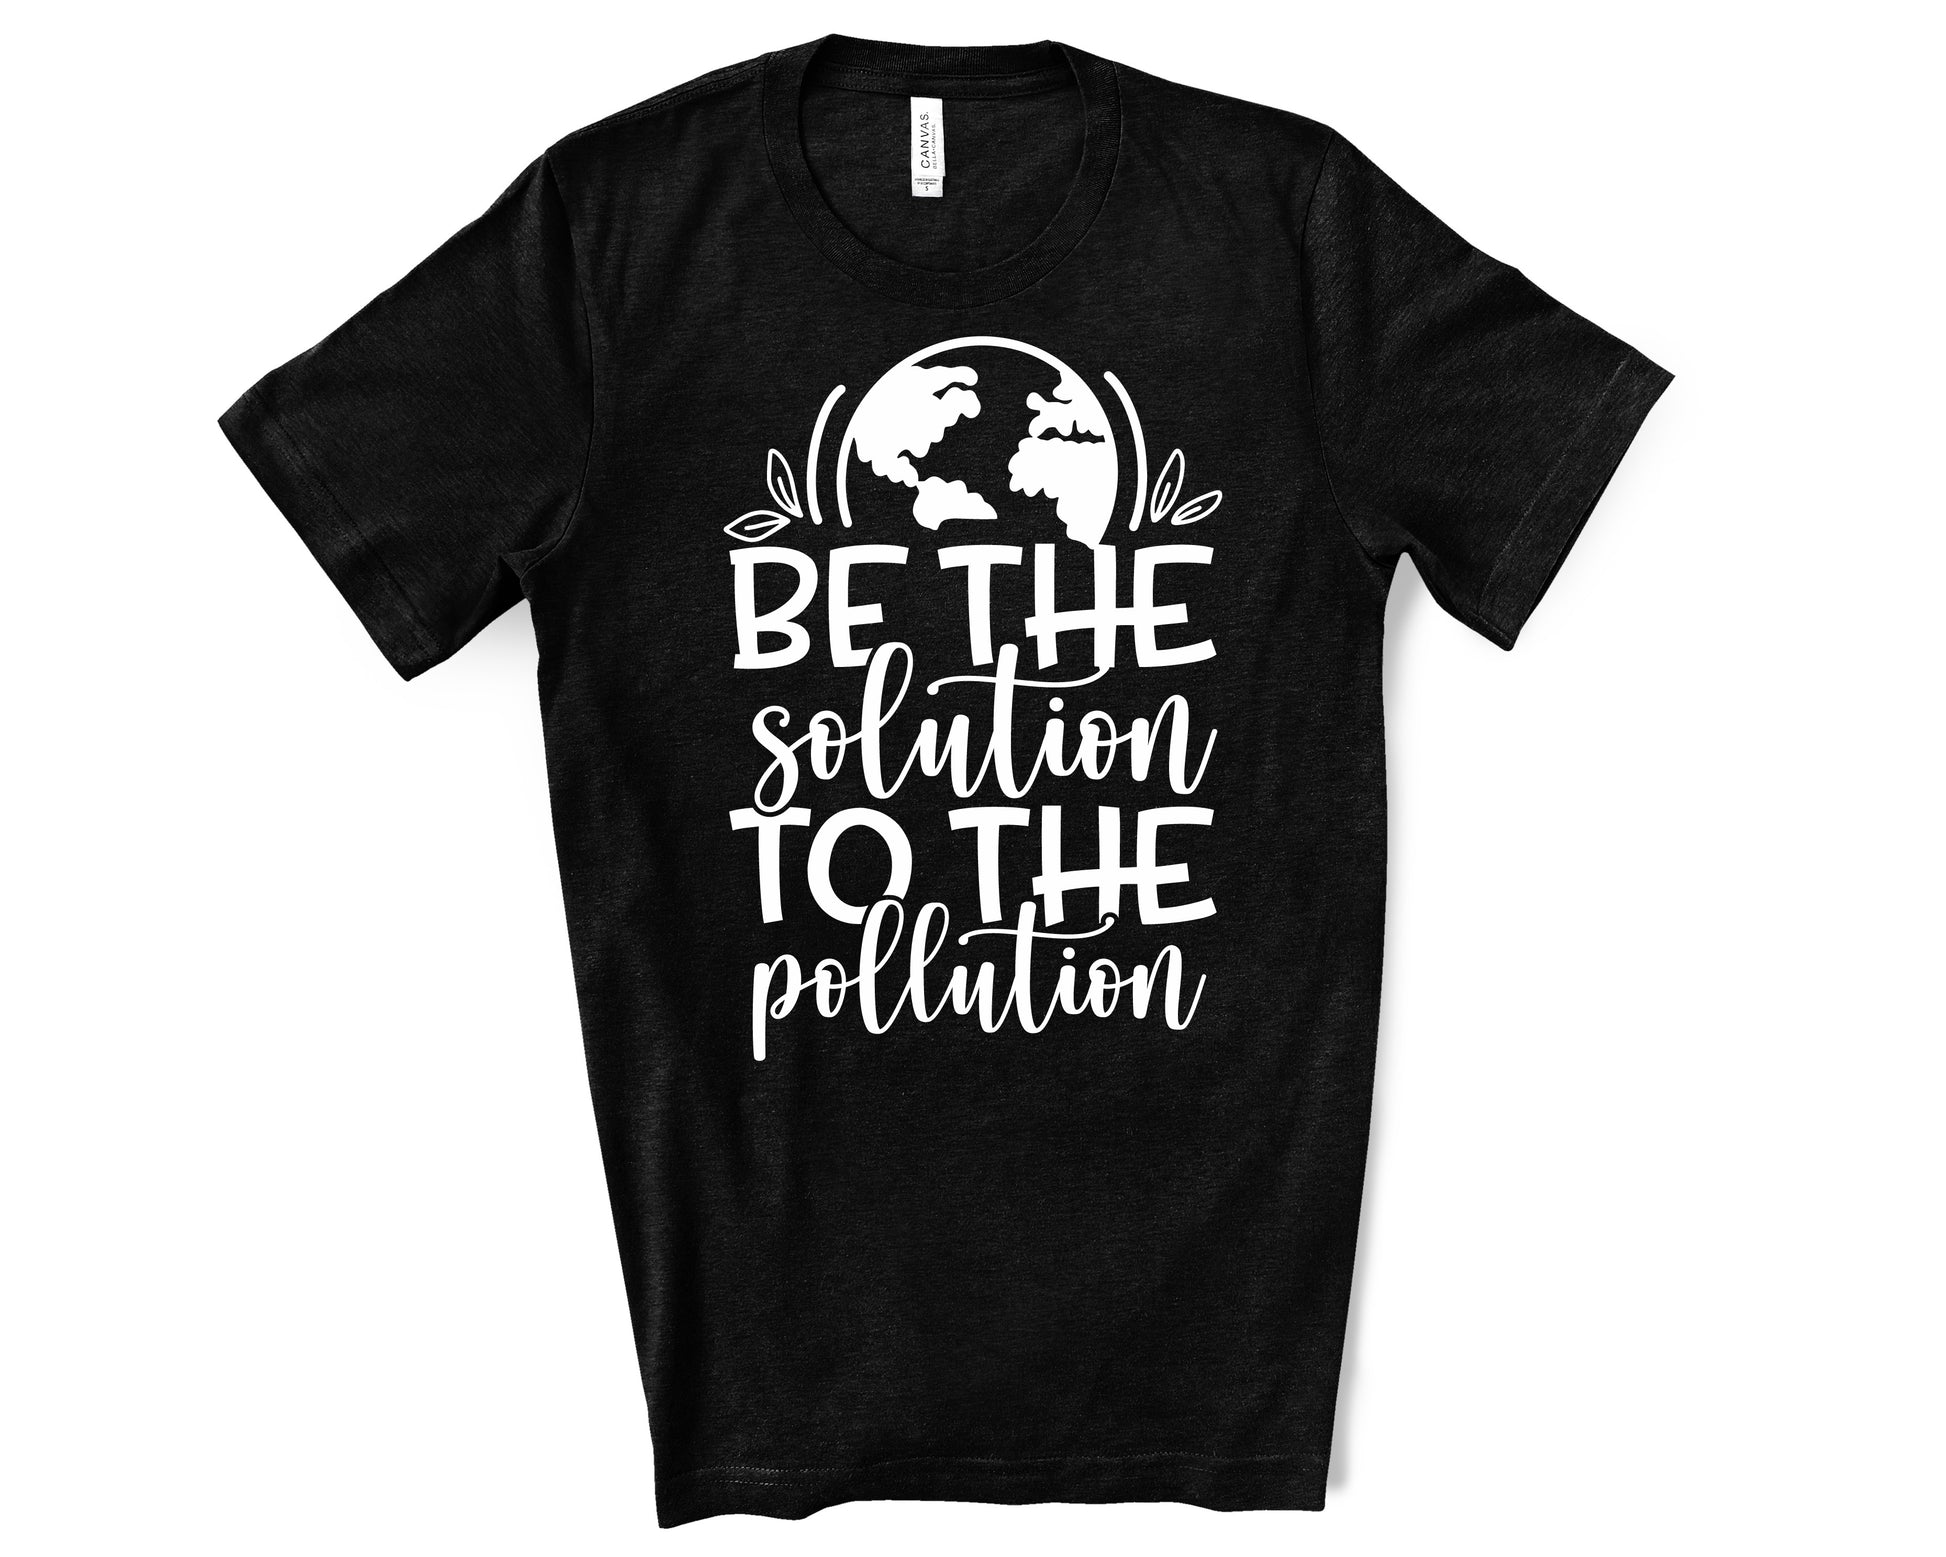 Be the solution to the pollution shirt